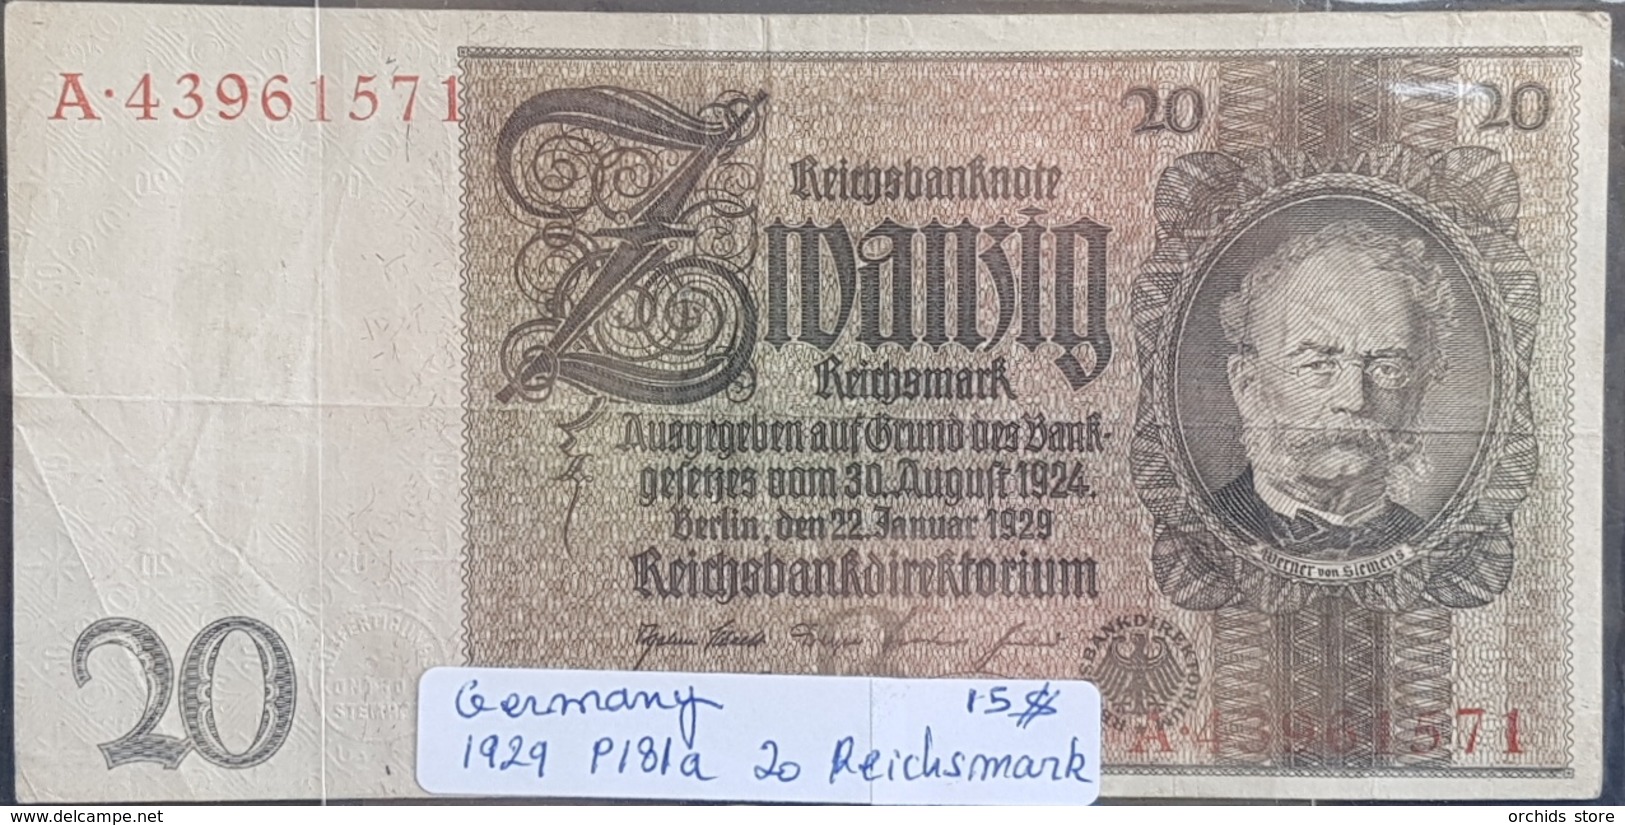 EBN1 - Germany 1929 Banknote 20 Reichsmark Pick #181a A.43961571 - 20 Mark